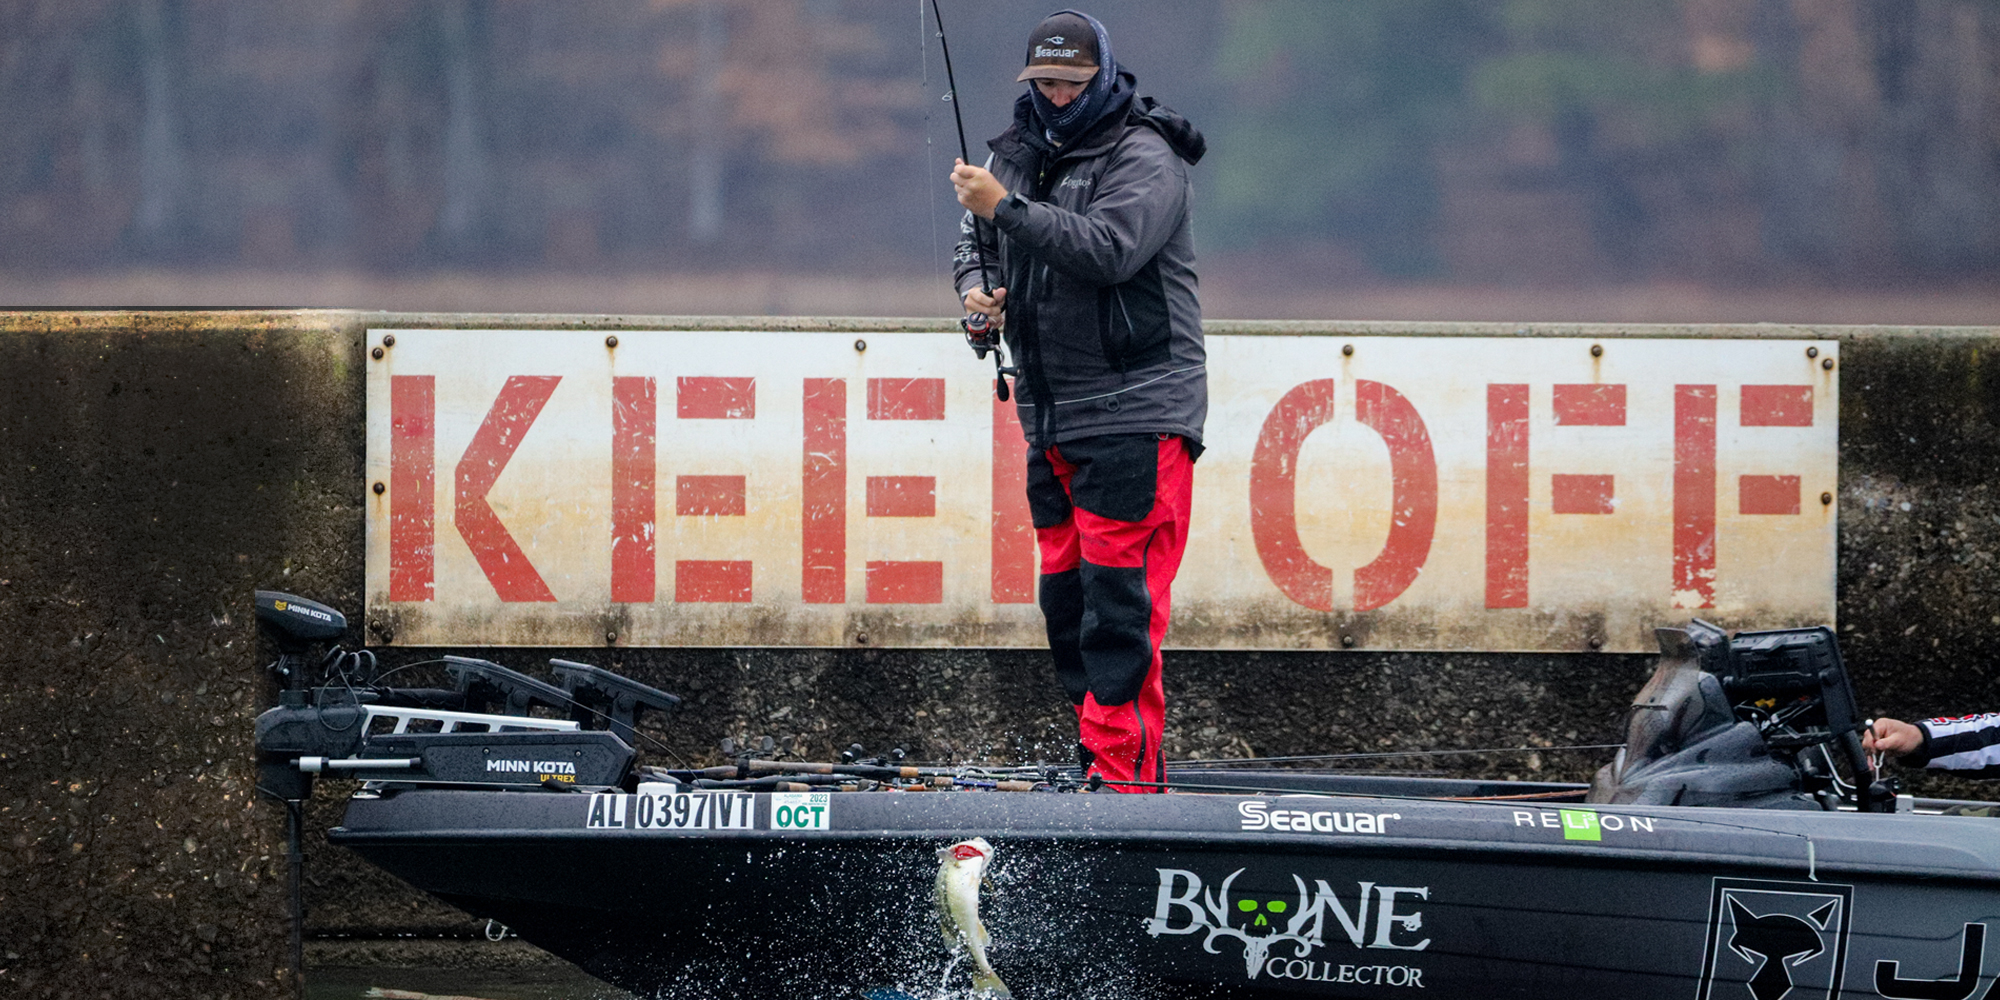 GALLERY Knockout Round 1 kicks off at REDCREST Major League Fishing